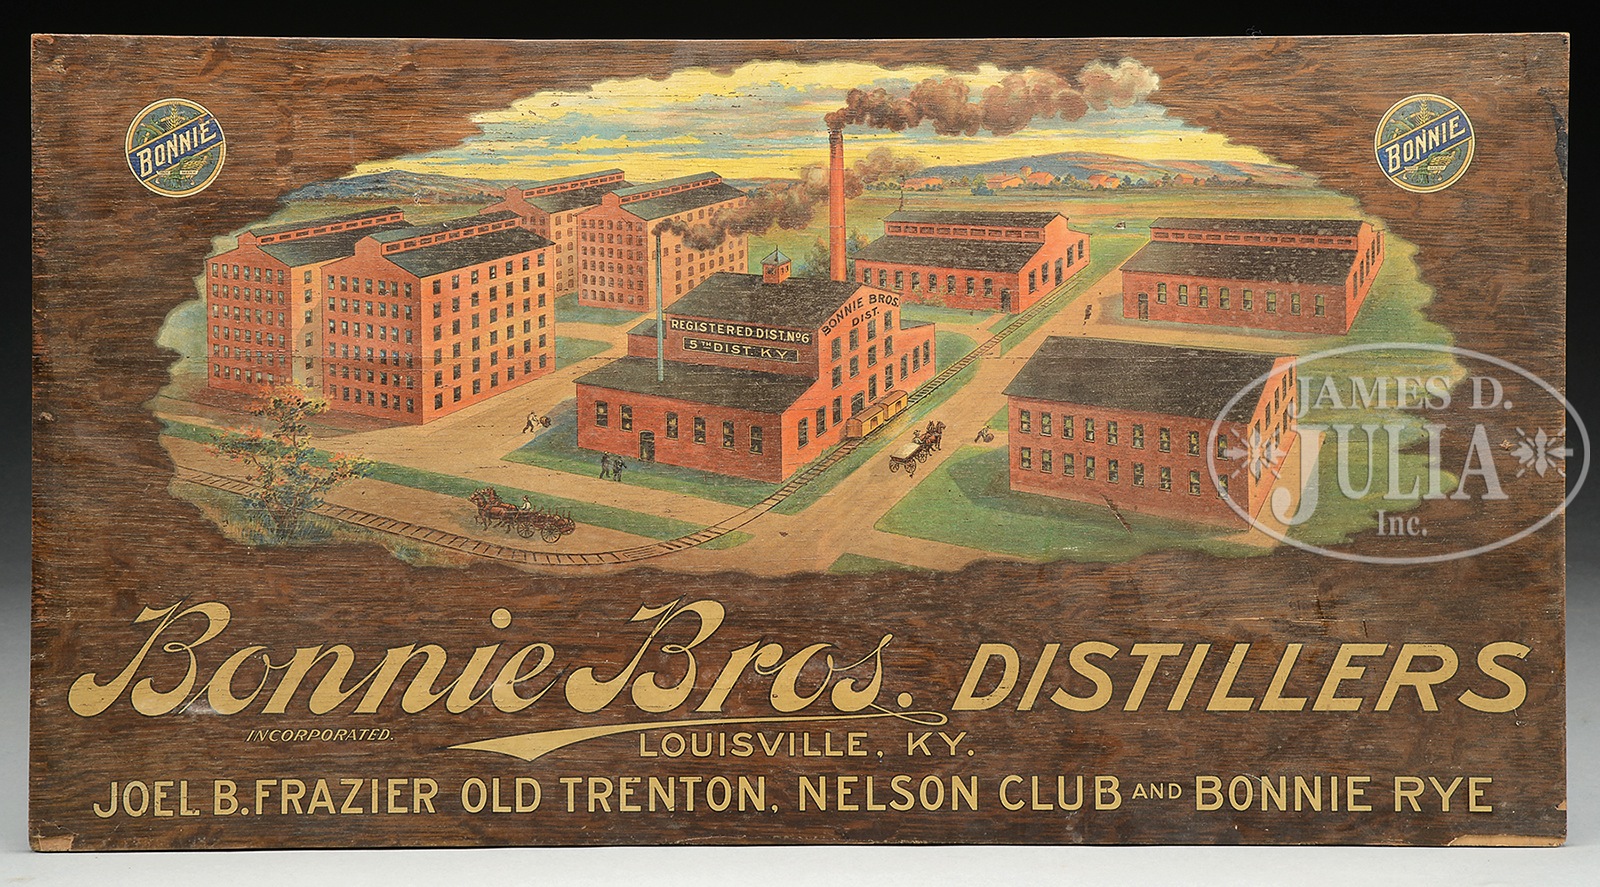 BONNIE BROTHERS DISTILLERS TRADE SIGN. Early 20th century, Chicago, IL. Sign manufactured by